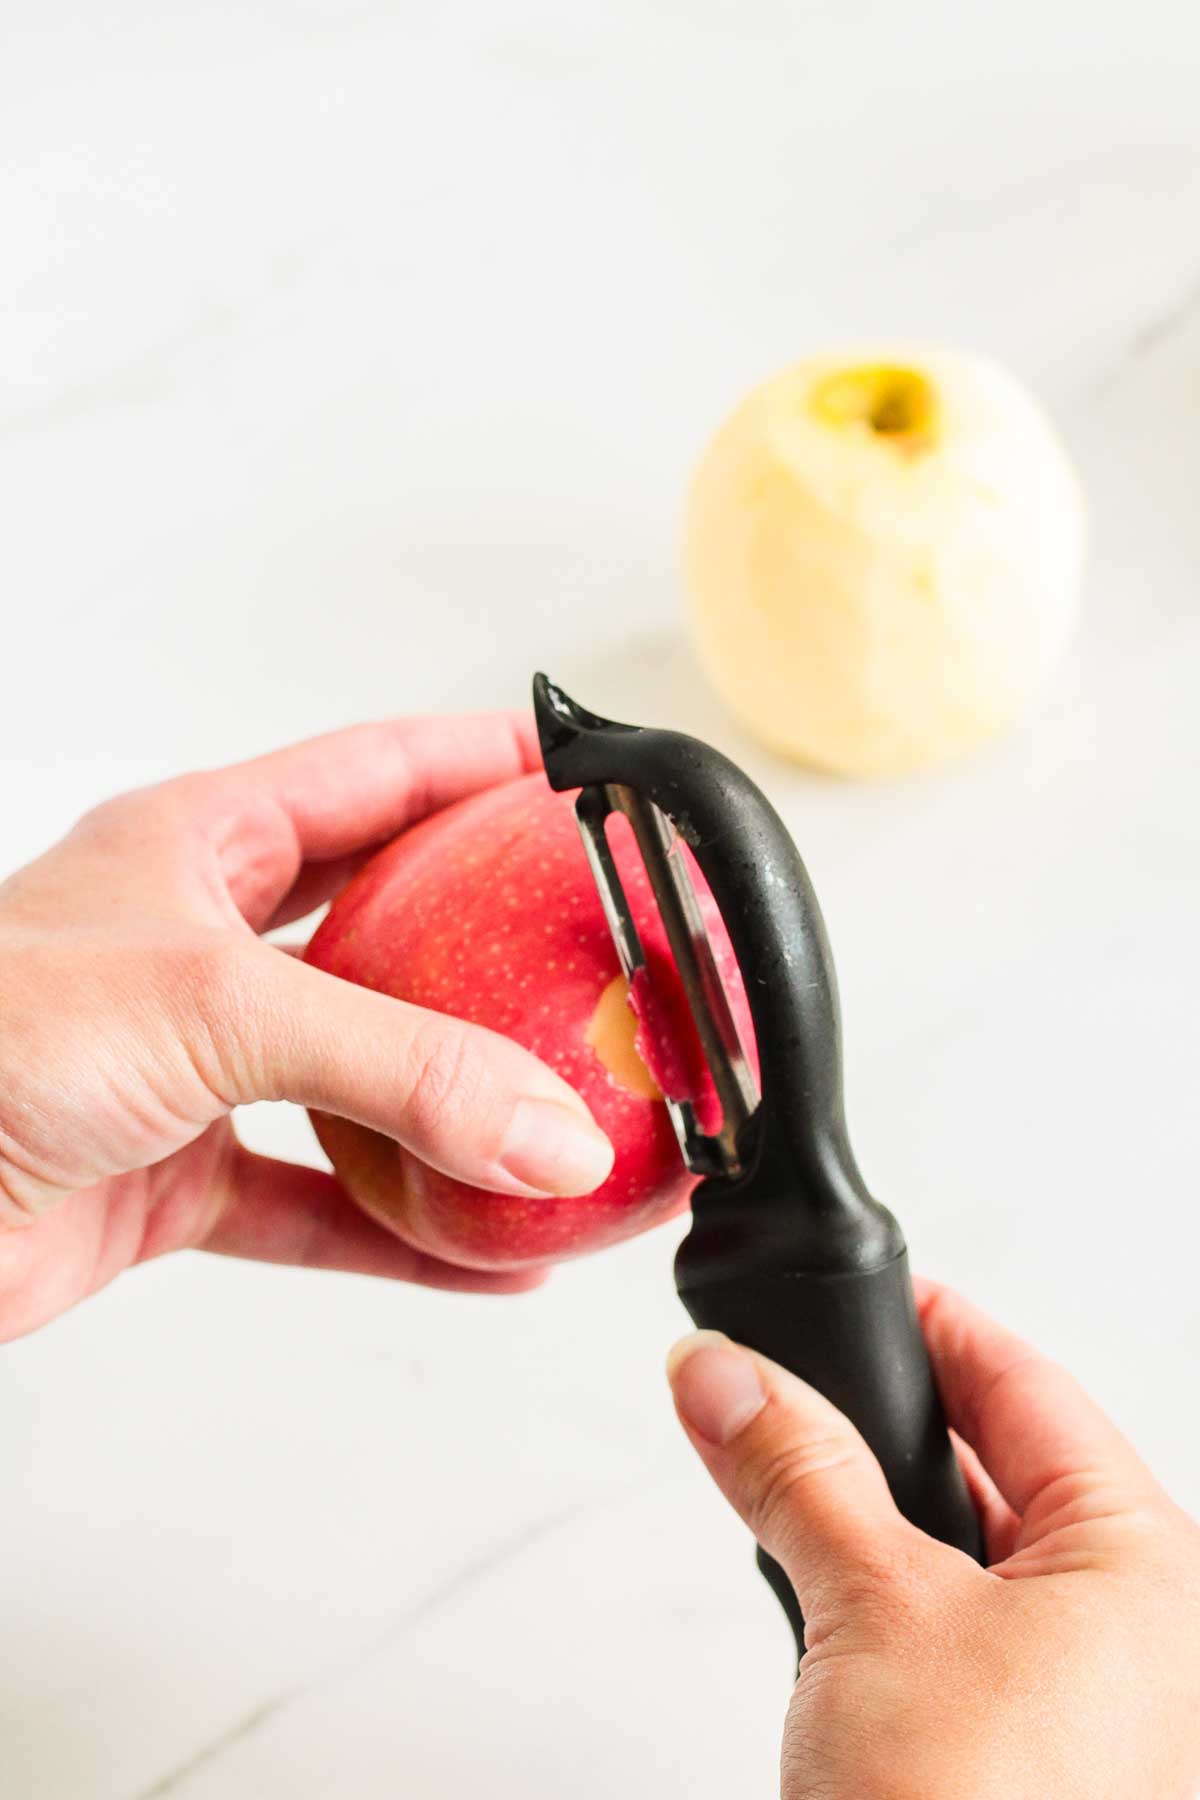 A red apple being peeled with a black vegetable peeler.